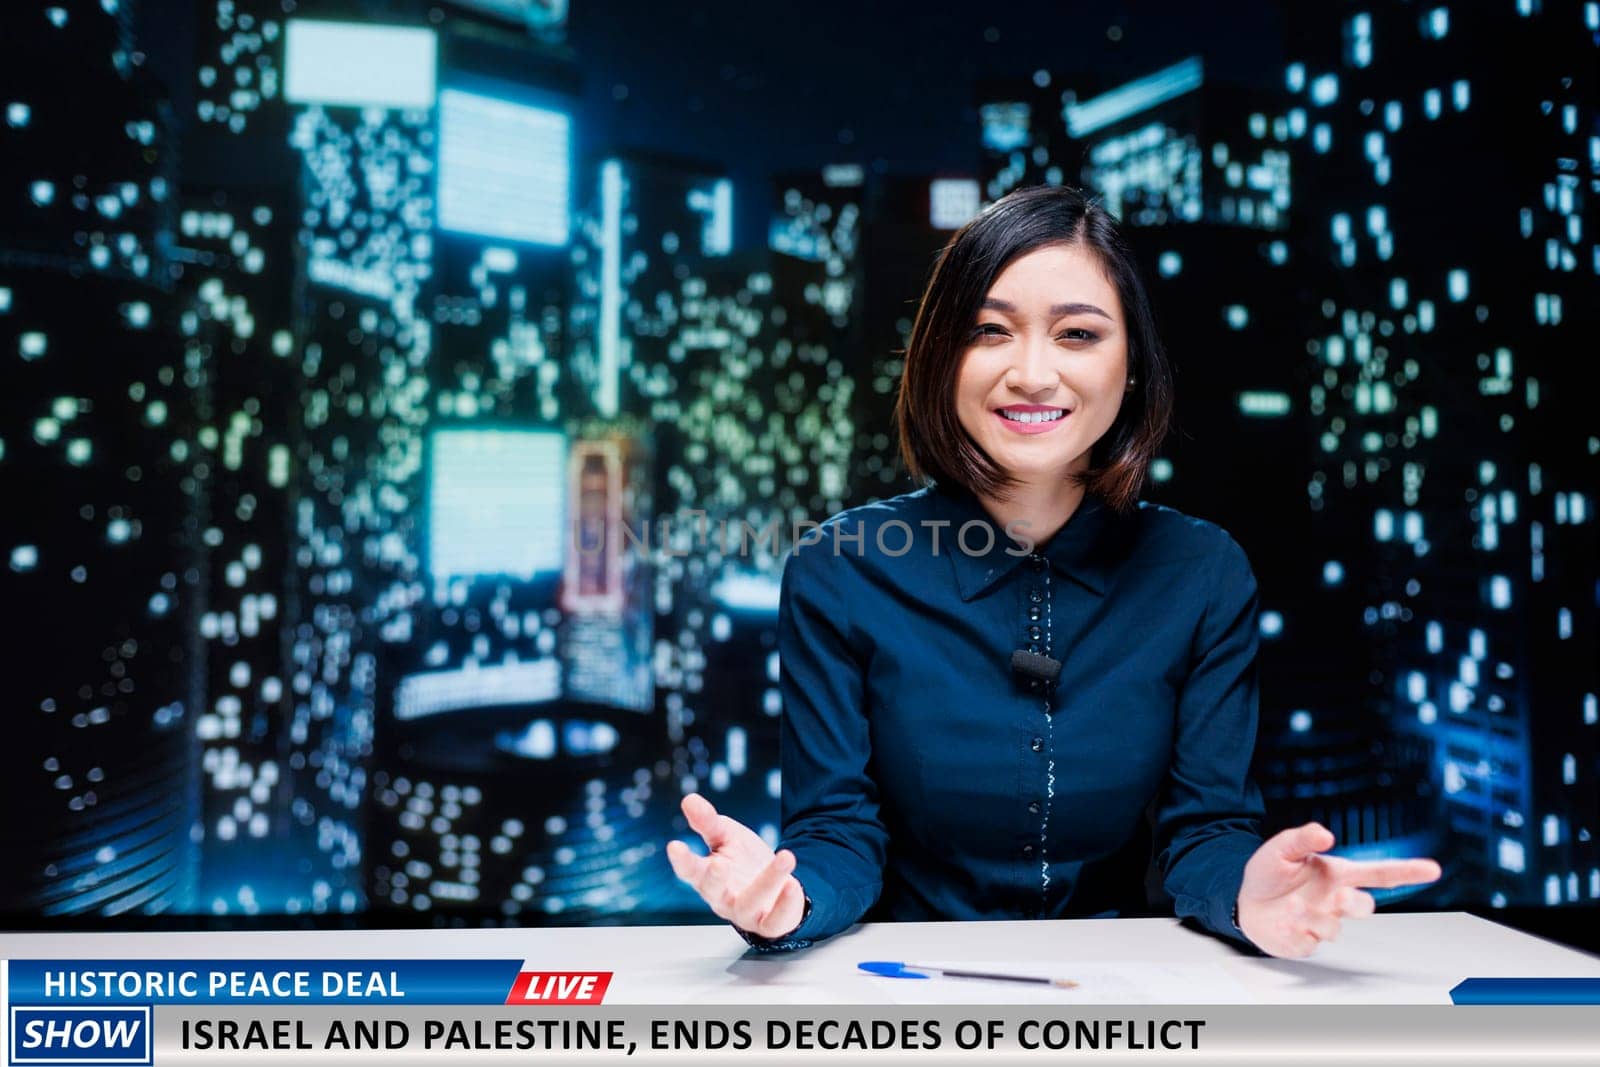 Woman reports historic peace deal between israel and palestine, countries at war for decades finally ending bloody conflict. TV reporter presenting accord signed by both nations, happy moment.